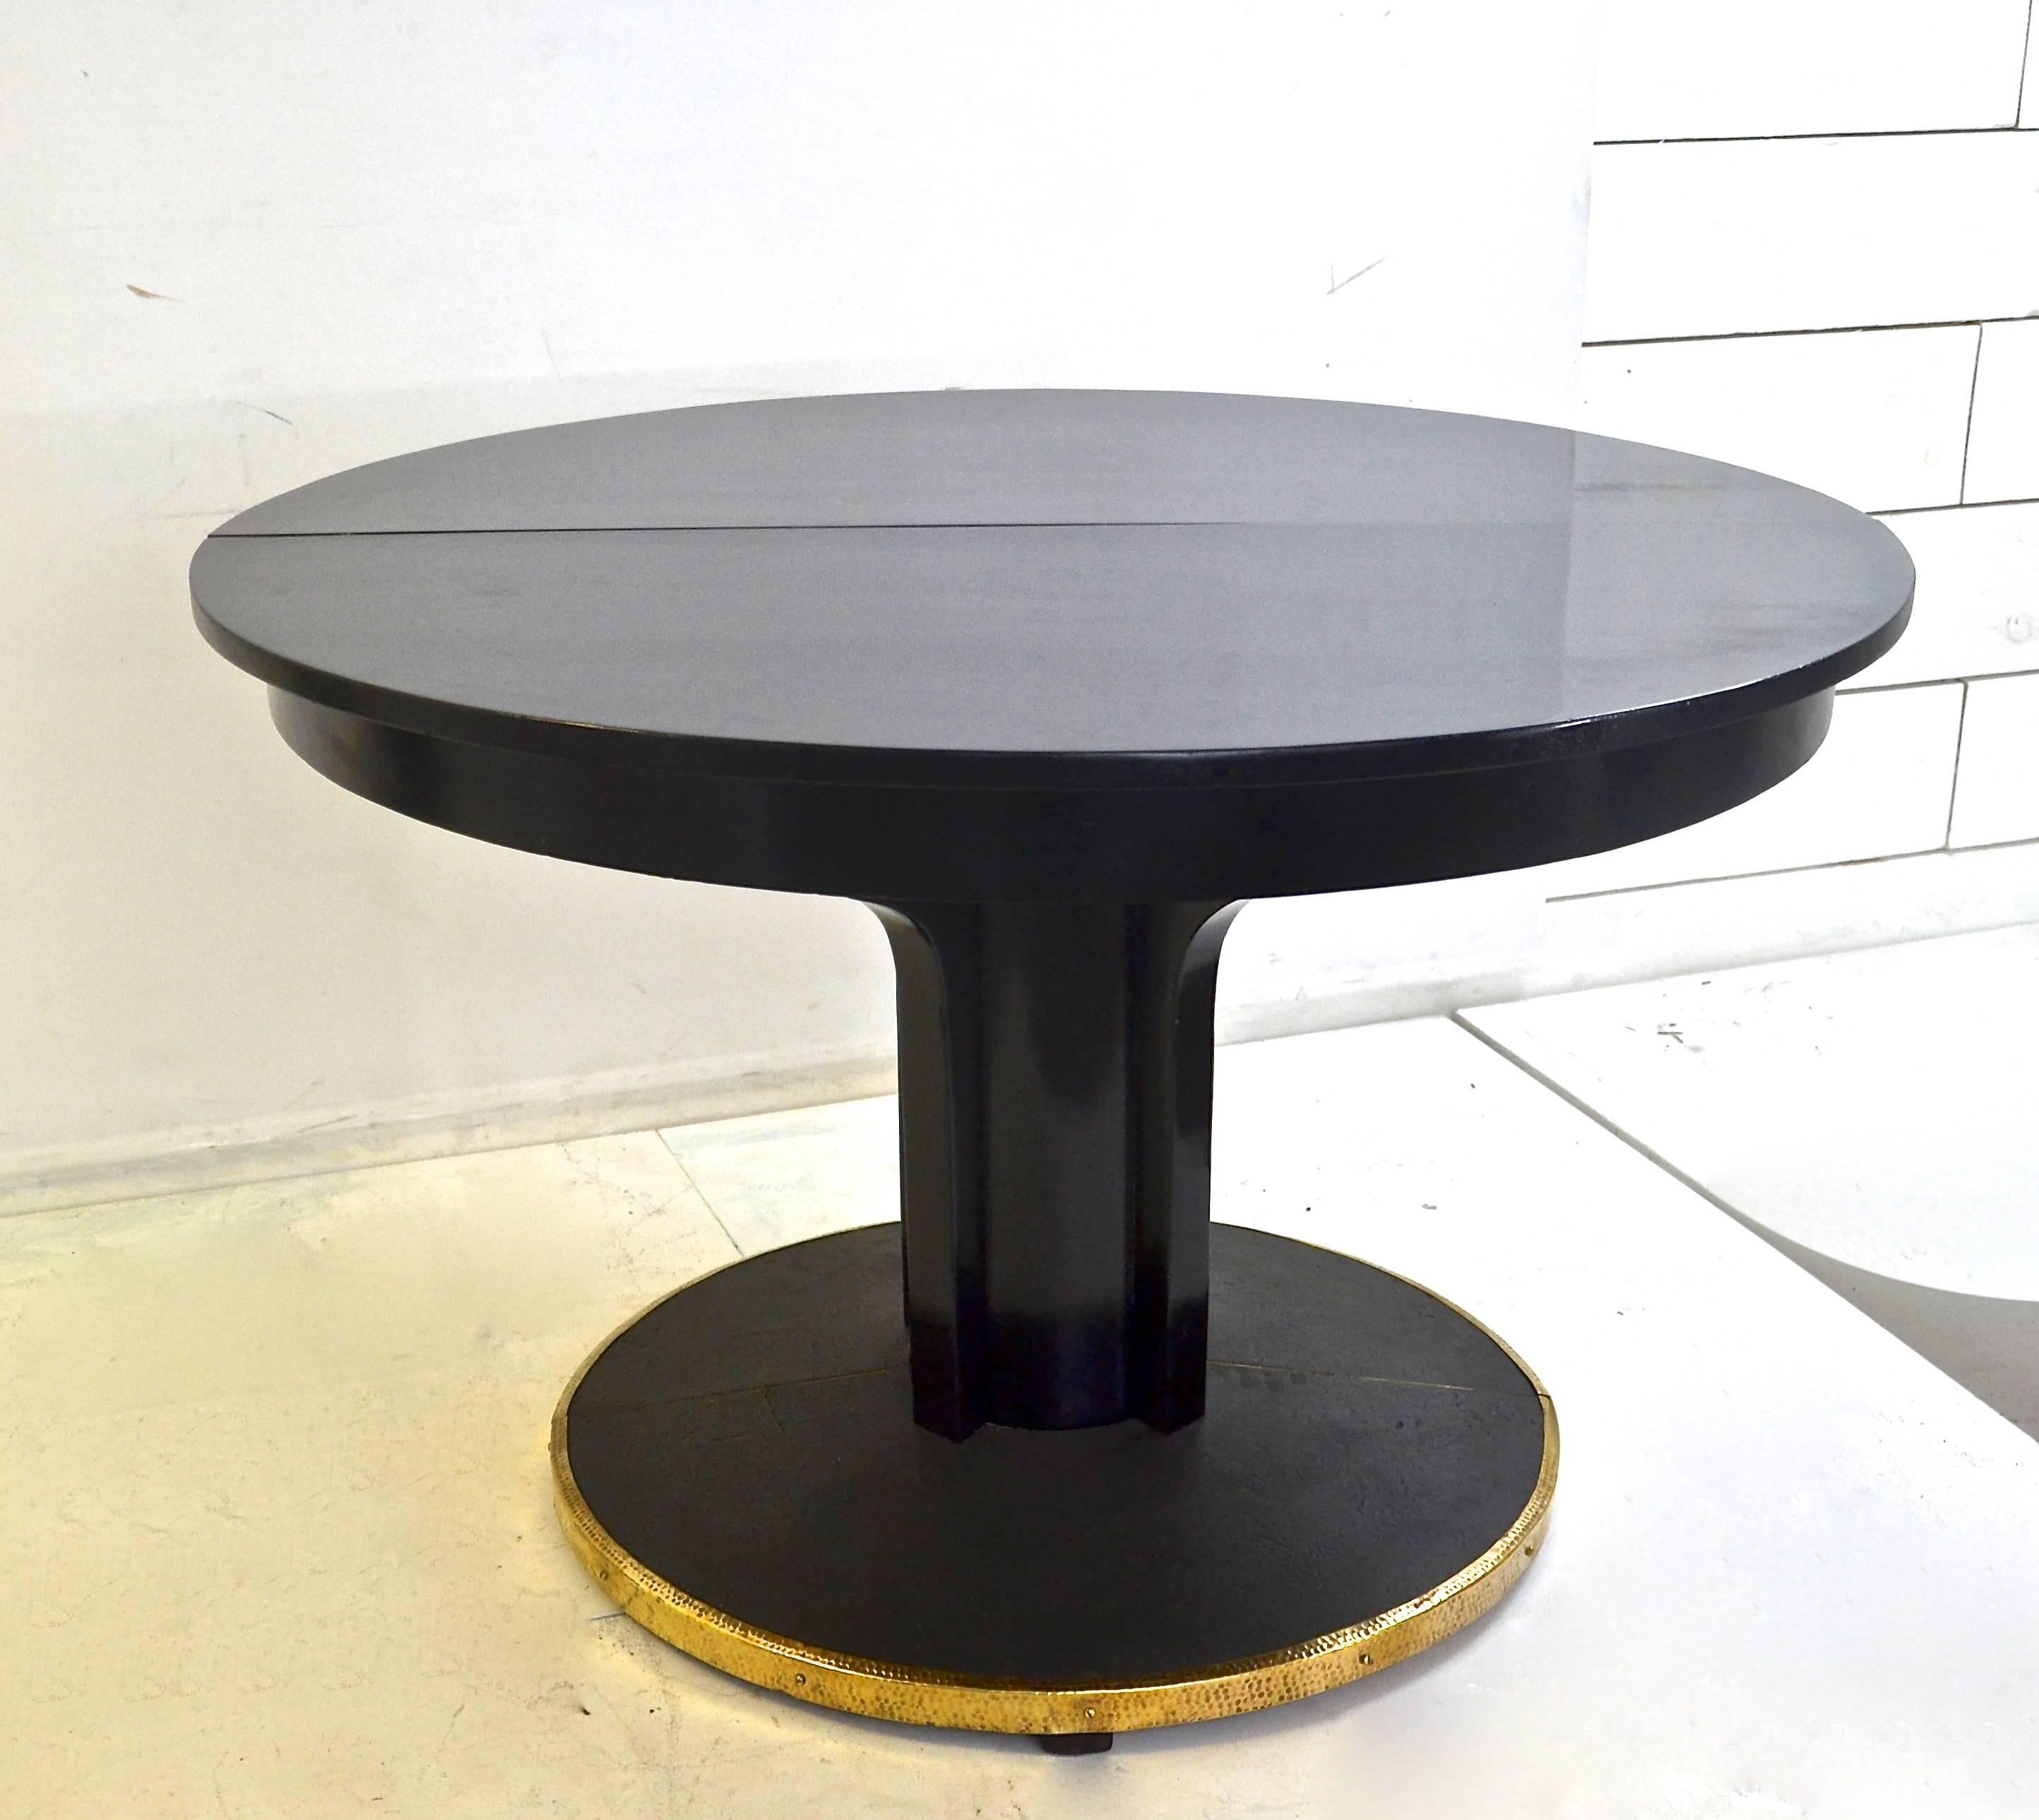 Early 20th century Josef Hoffmann black lacquer Gueridon for Thonet, Vienna Secession.